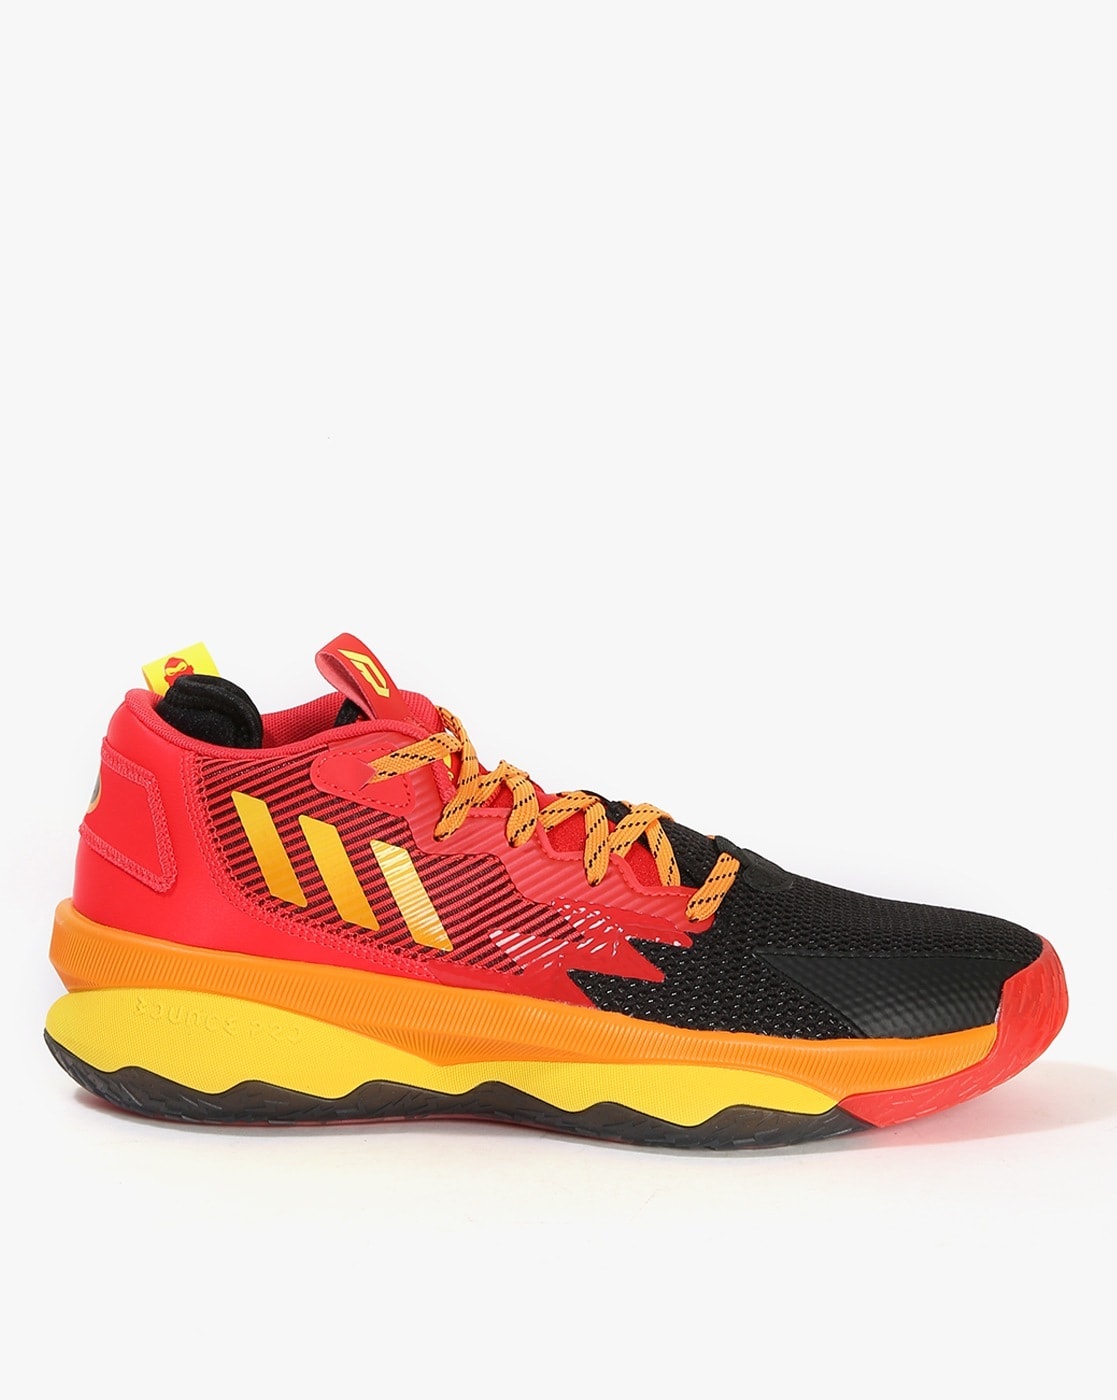 Men's Basketball Shoes  Buy Basketball Shoes for Men - adidas India